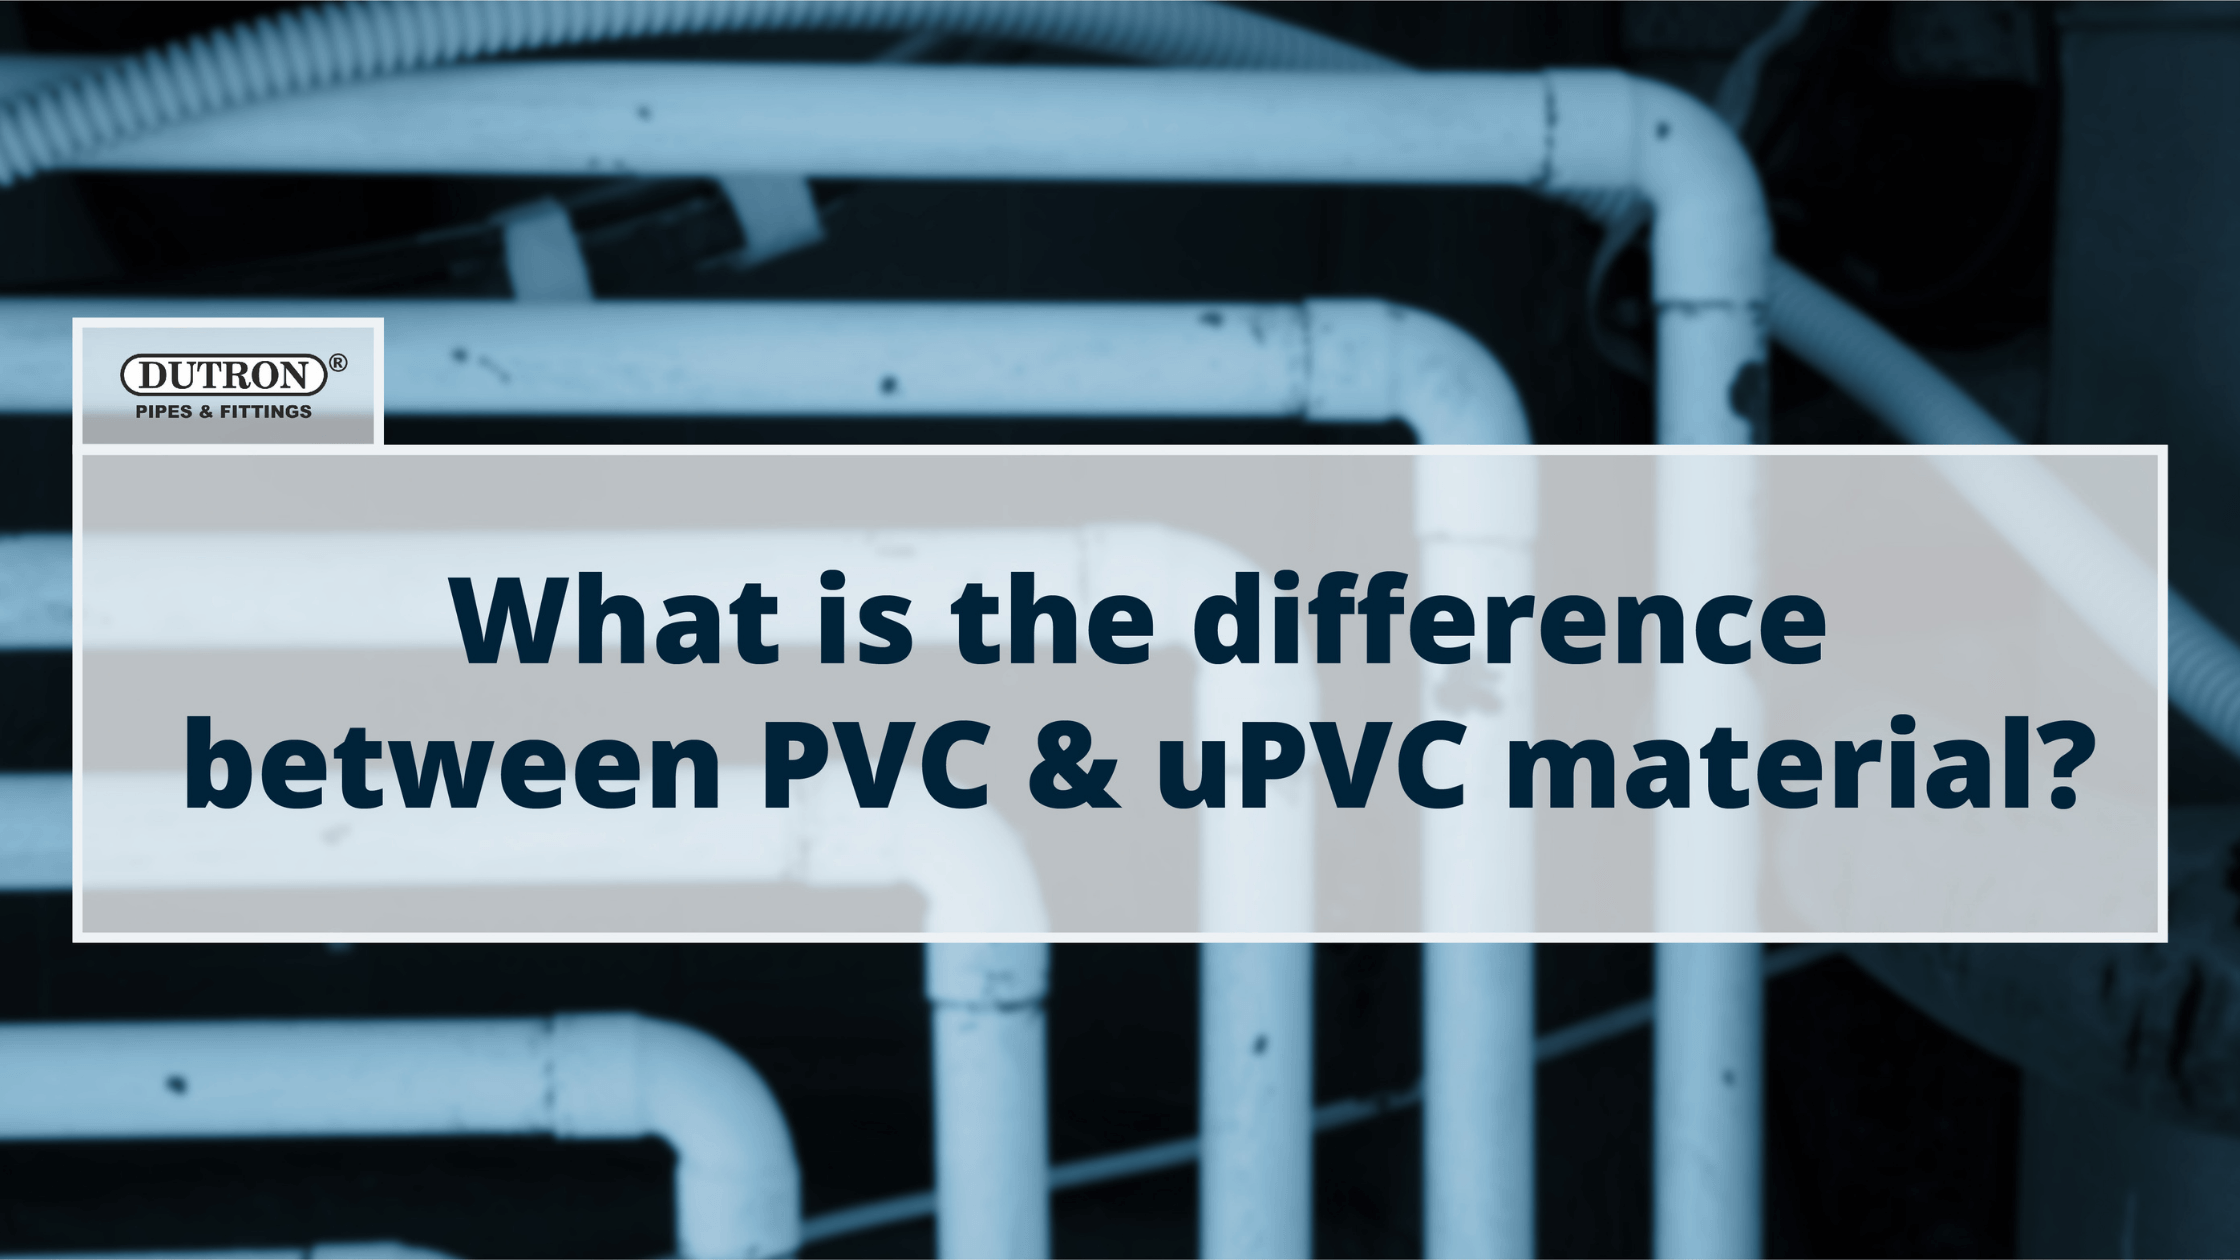 What is the difference between PVC & uPVC material?